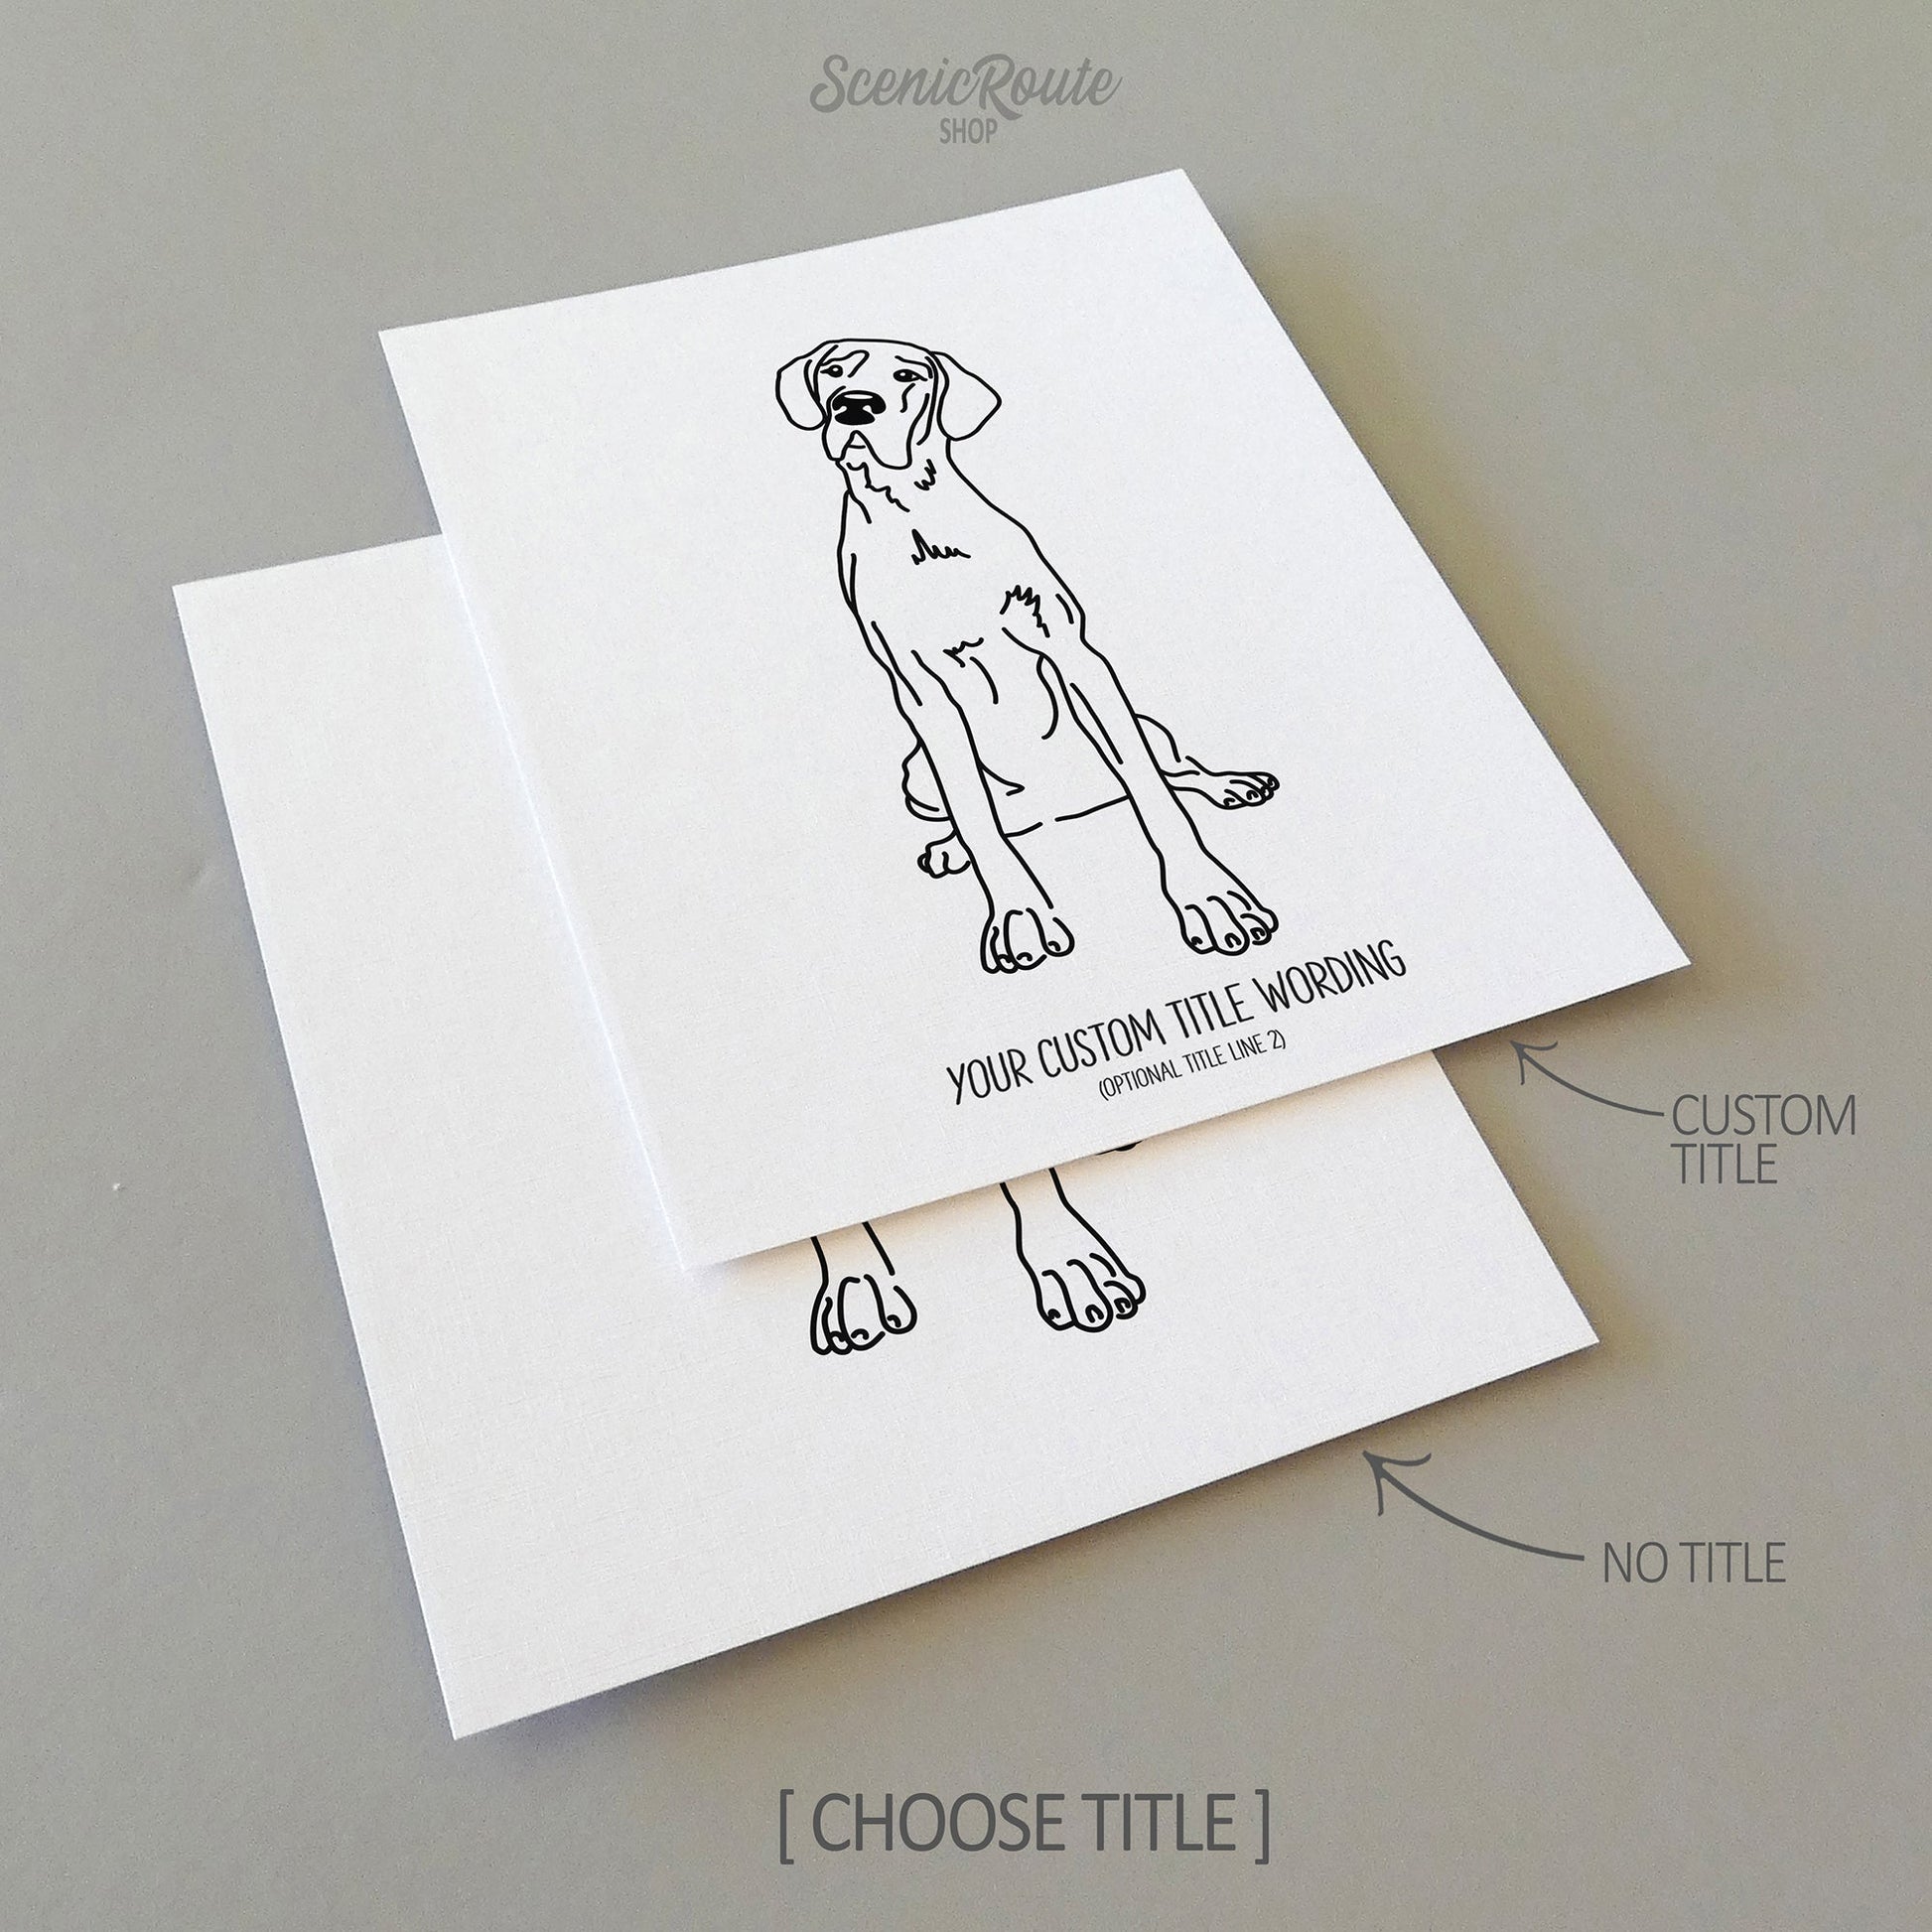 Two line art drawings of a Great Dane dog on white linen paper with a gray background.  The pieces are shown with “No Title” and “Custom Title” options for the available art print options.